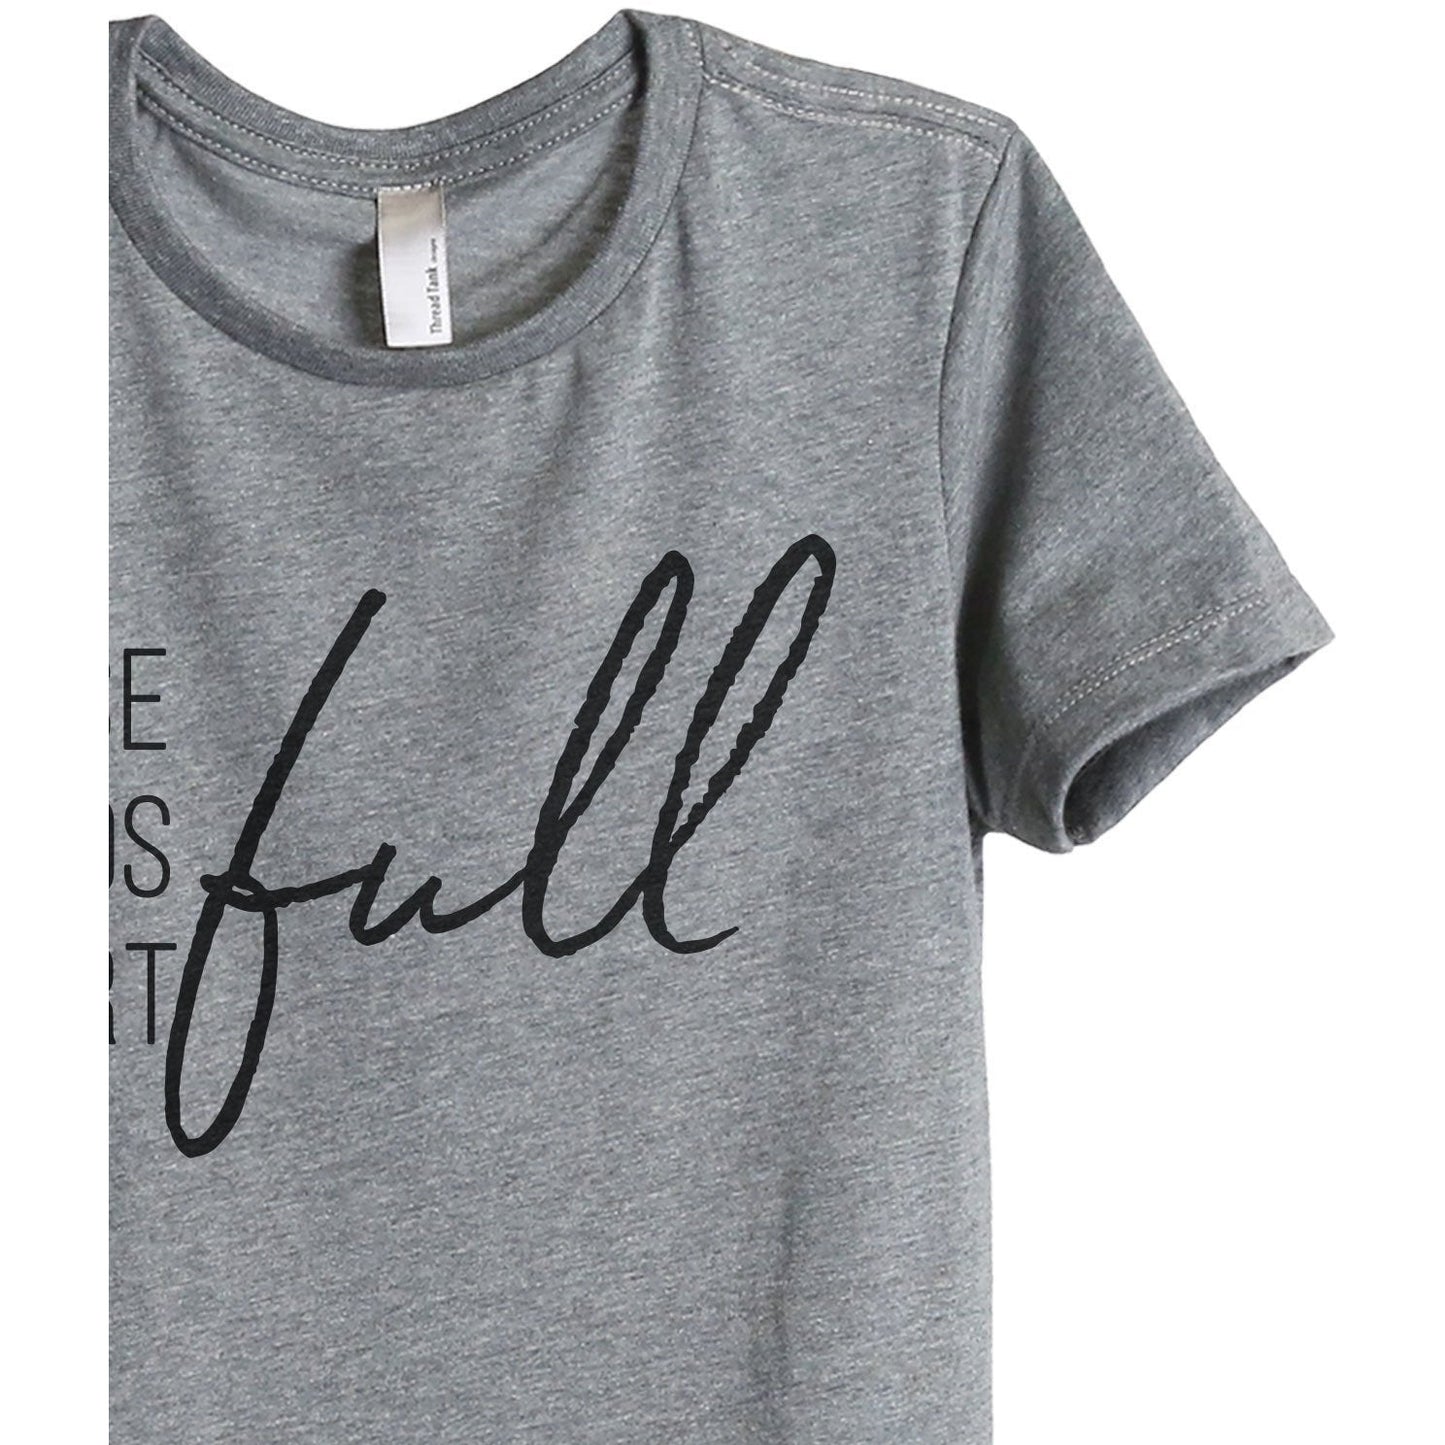 House Full Hands Full Heart Full Women's Relaxed Crewneck T-Shirt Top Tee Heather Grey Zoom Details
